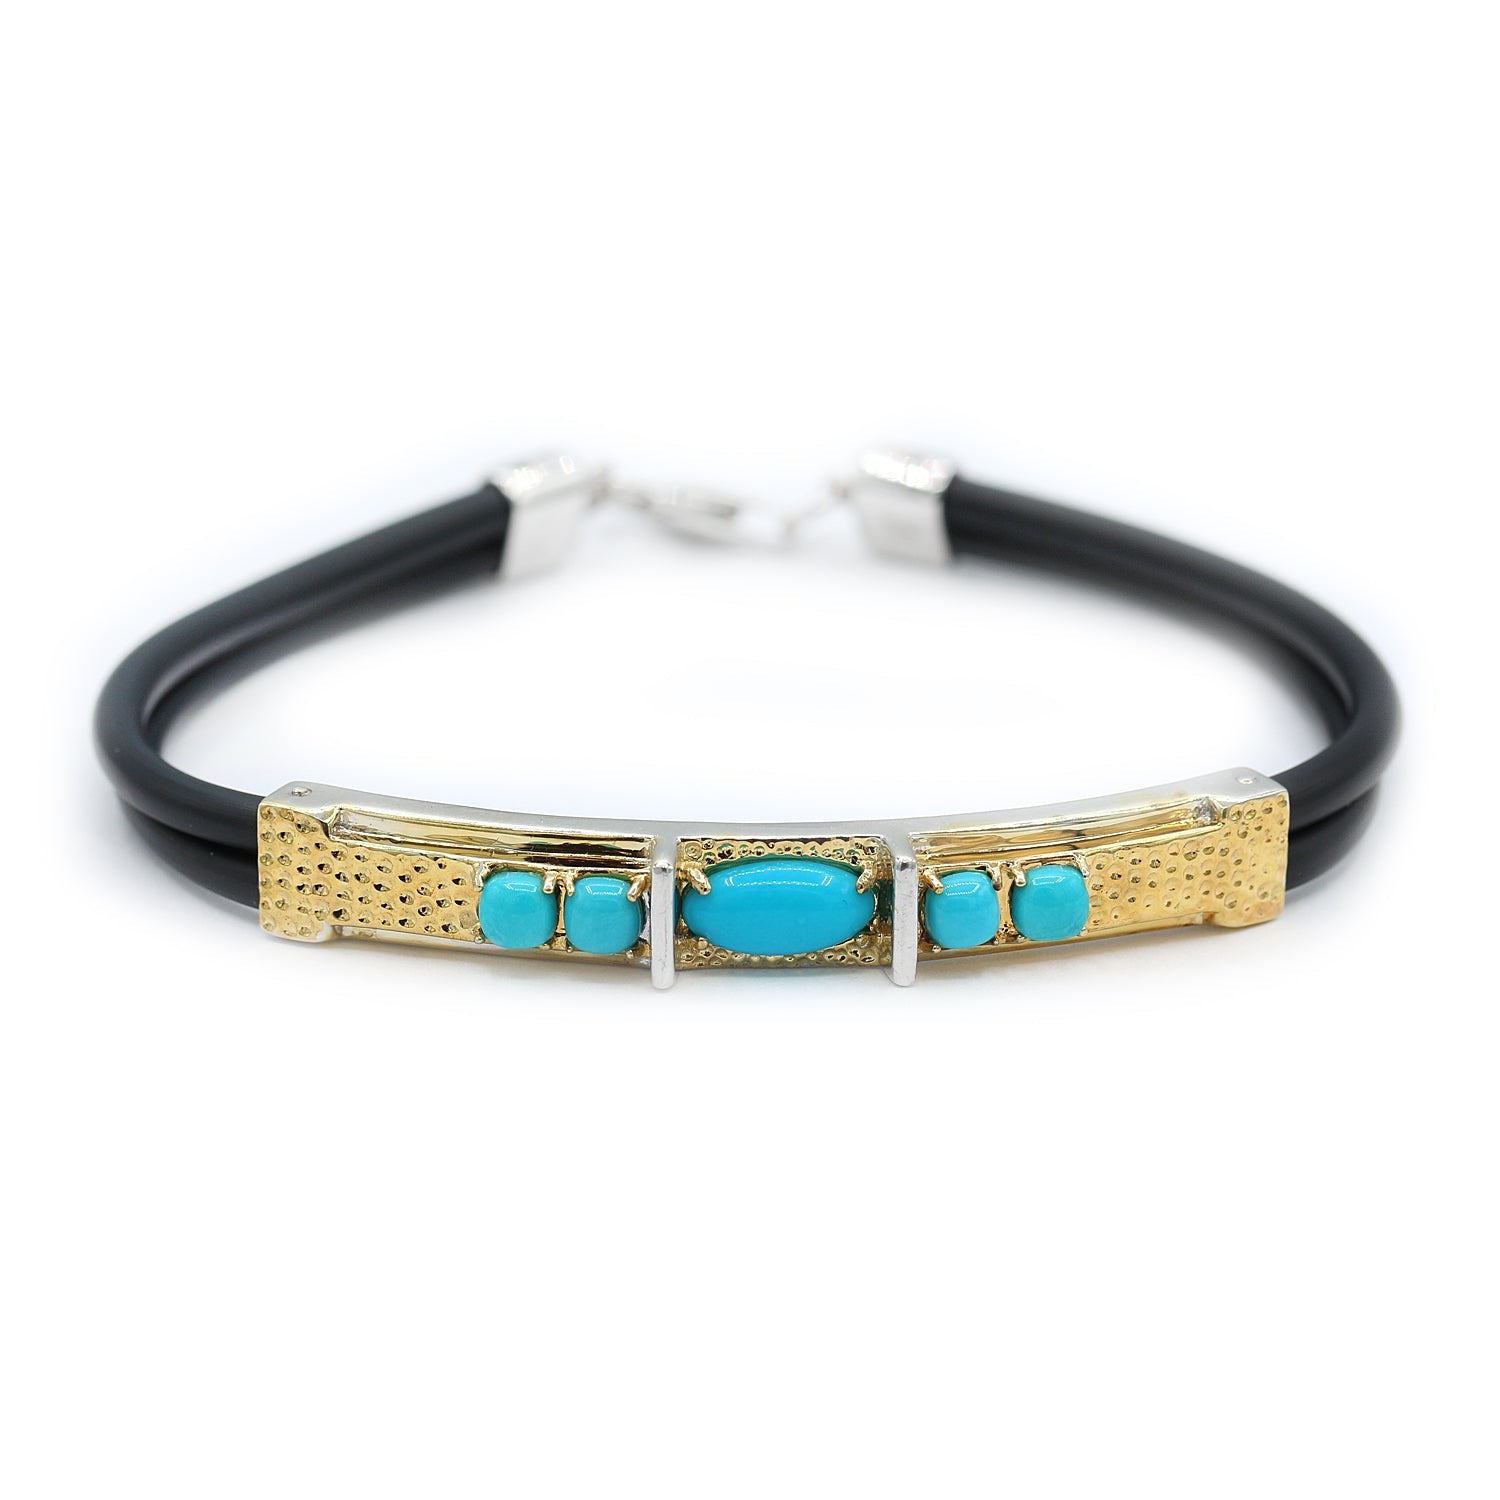 https://gevapps.com/products-importer/uploads/turquoise.jpg